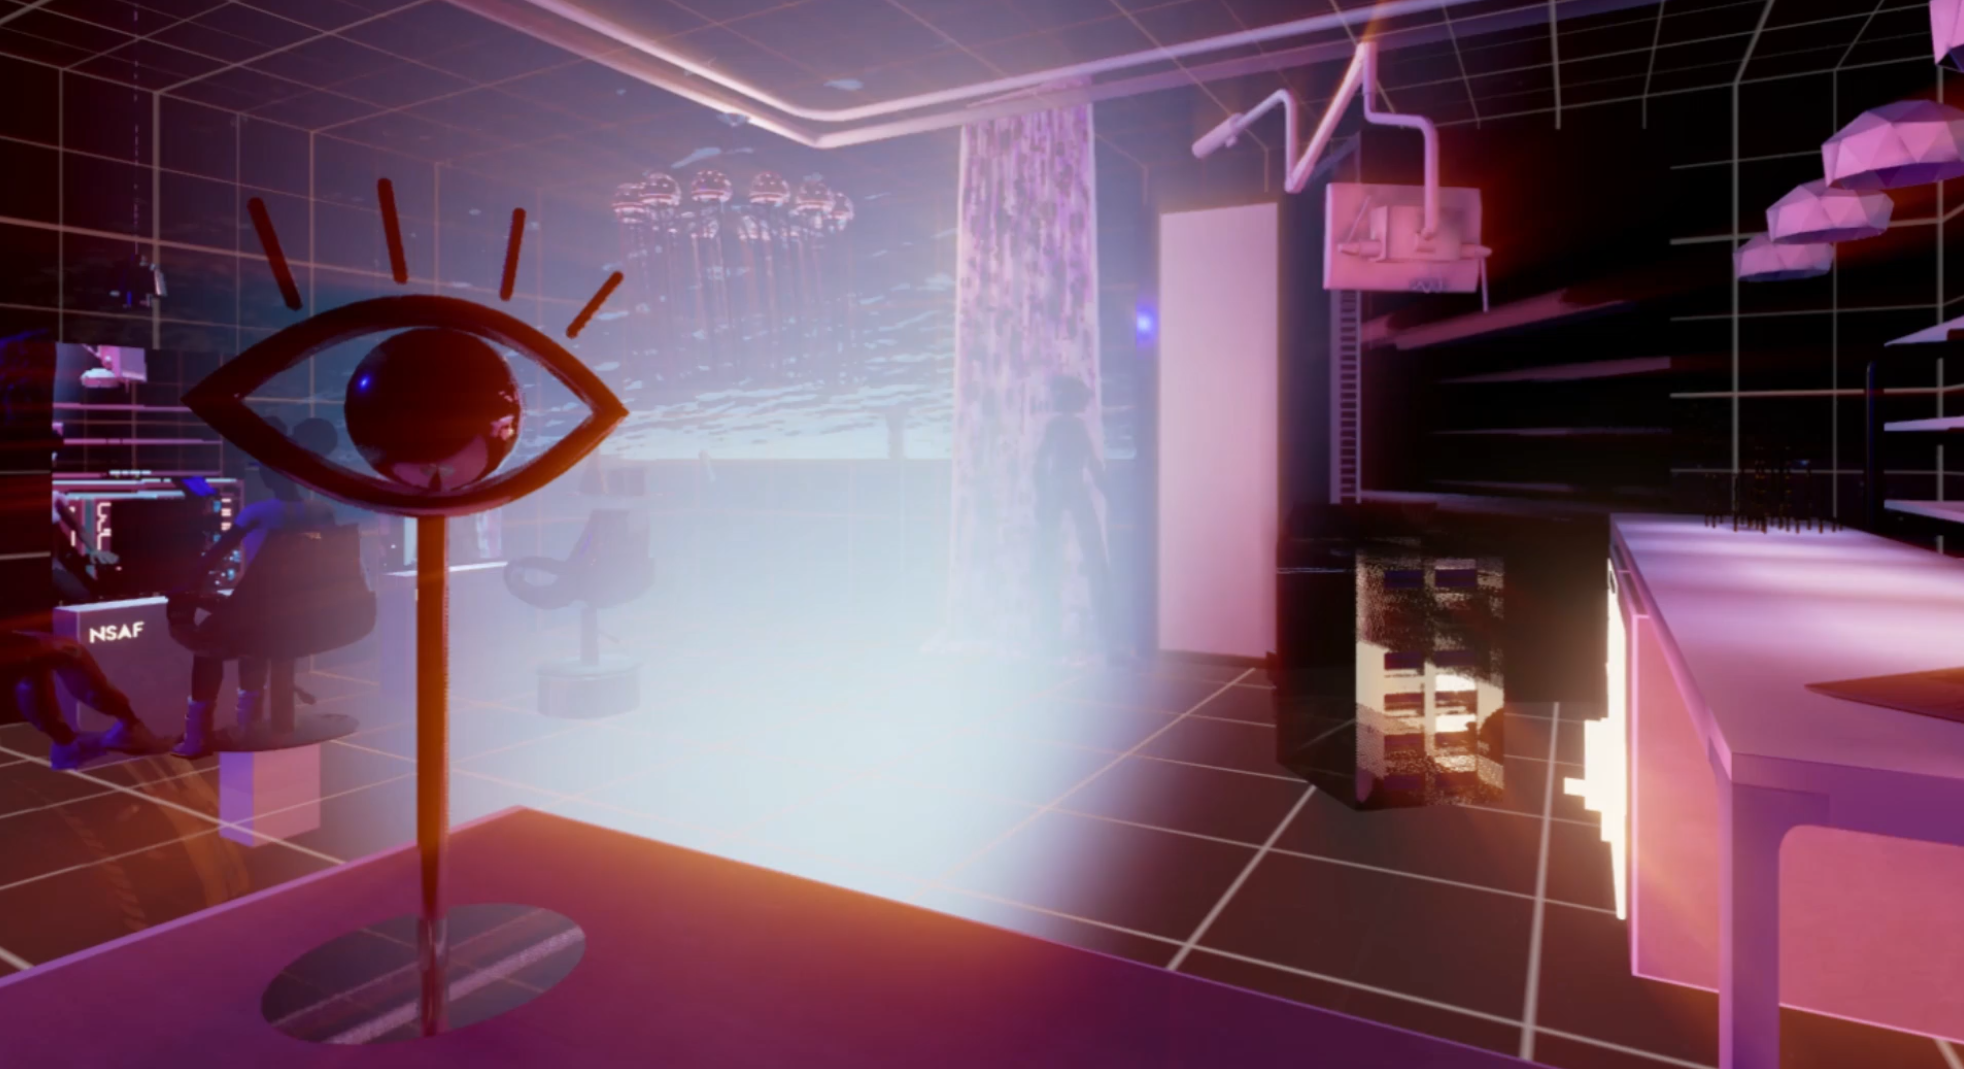 render of a purple room with a spotlight in the center and an eye icon